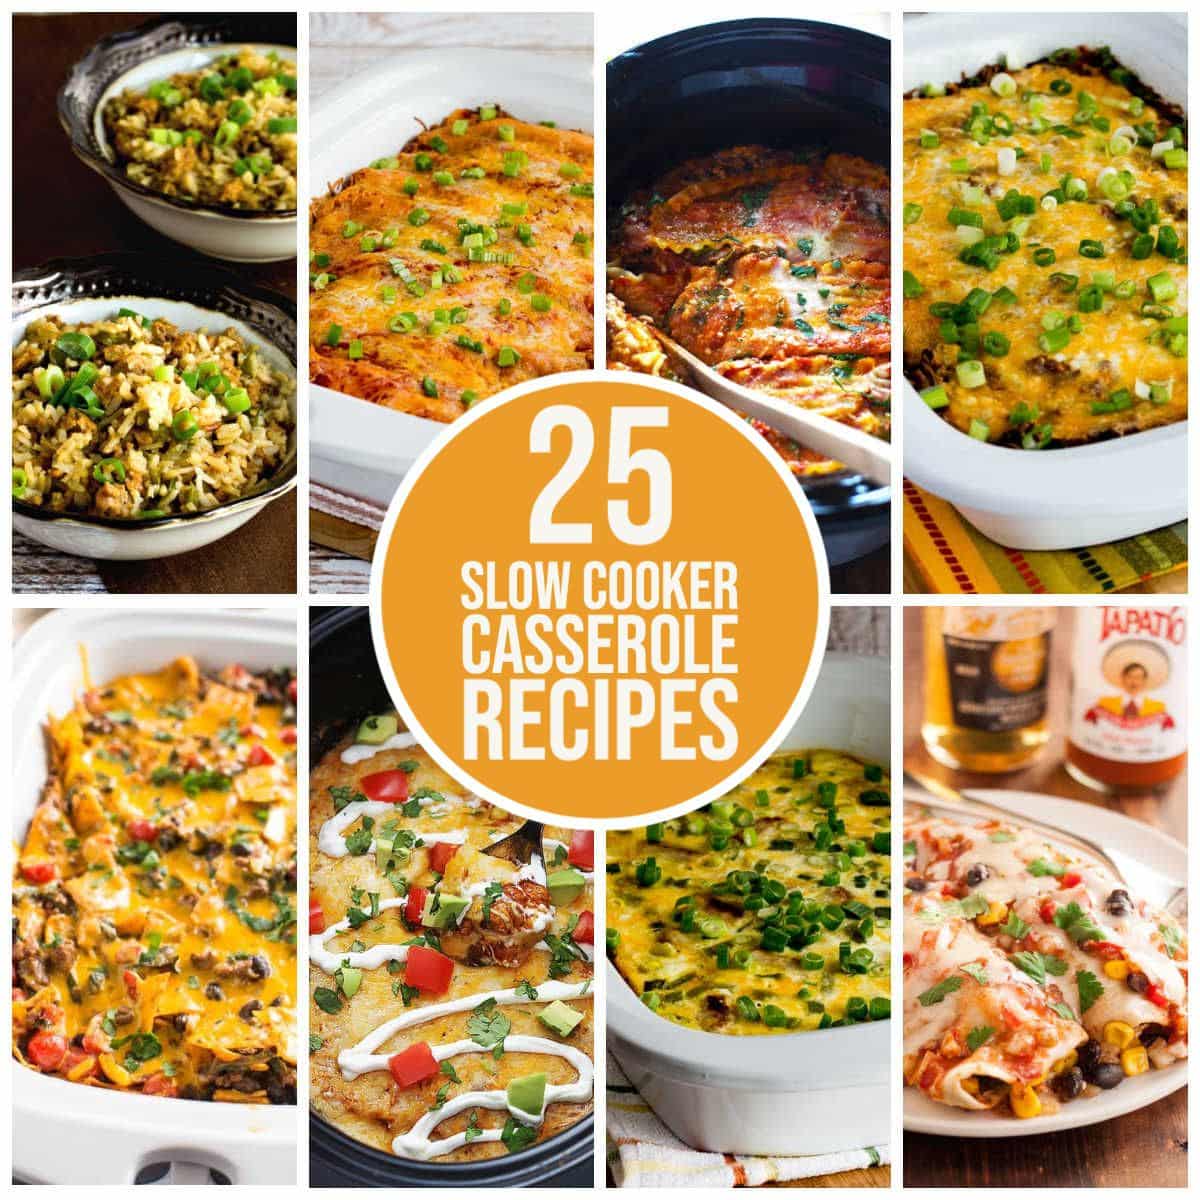 25 Slow Cooker Casserole Recipes collage of featured recipes with text overlay